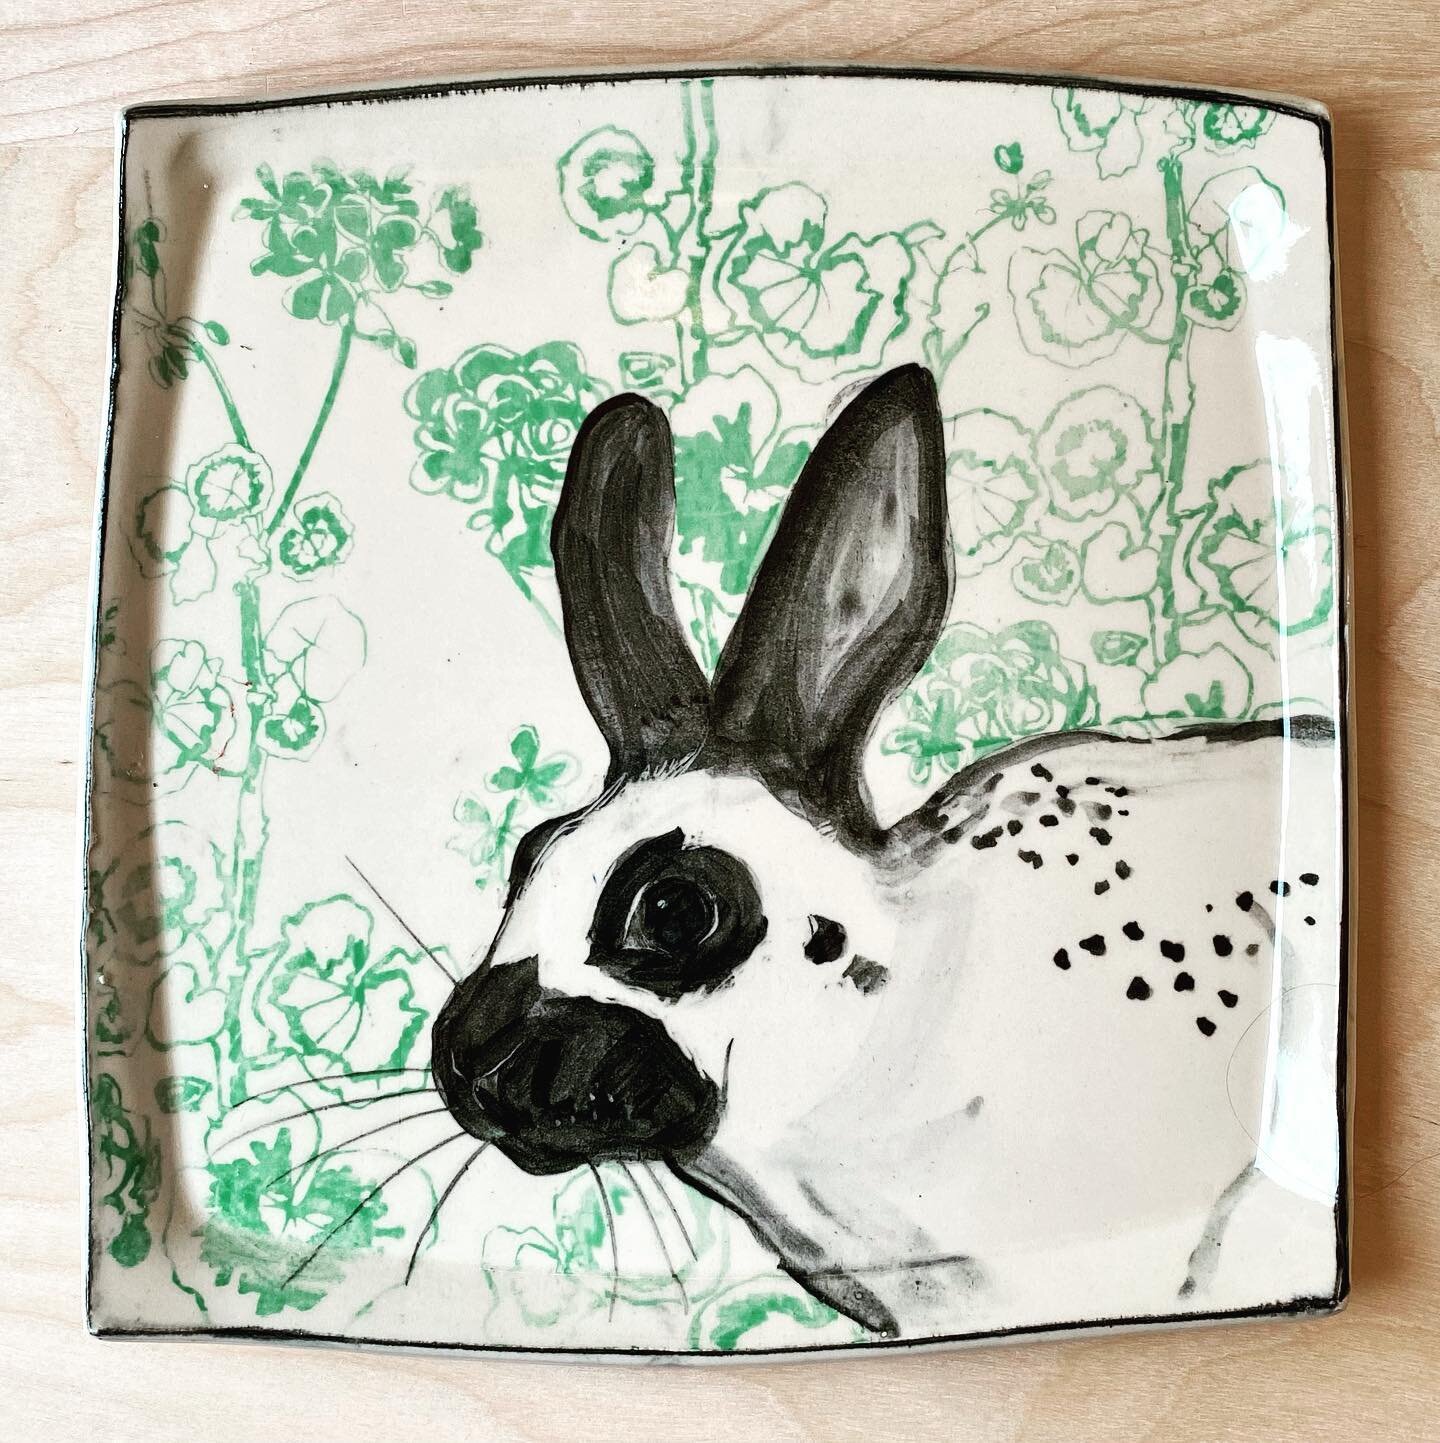 Year of the rabbit (and kangaroo?) I&rsquo;ve got big square dinner plates like these on offer in the fundraiser @potsonwheels is running right now. We&rsquo;re presenting a fabulous show @nceca this year called @claywatermemory Donating to the Kicks